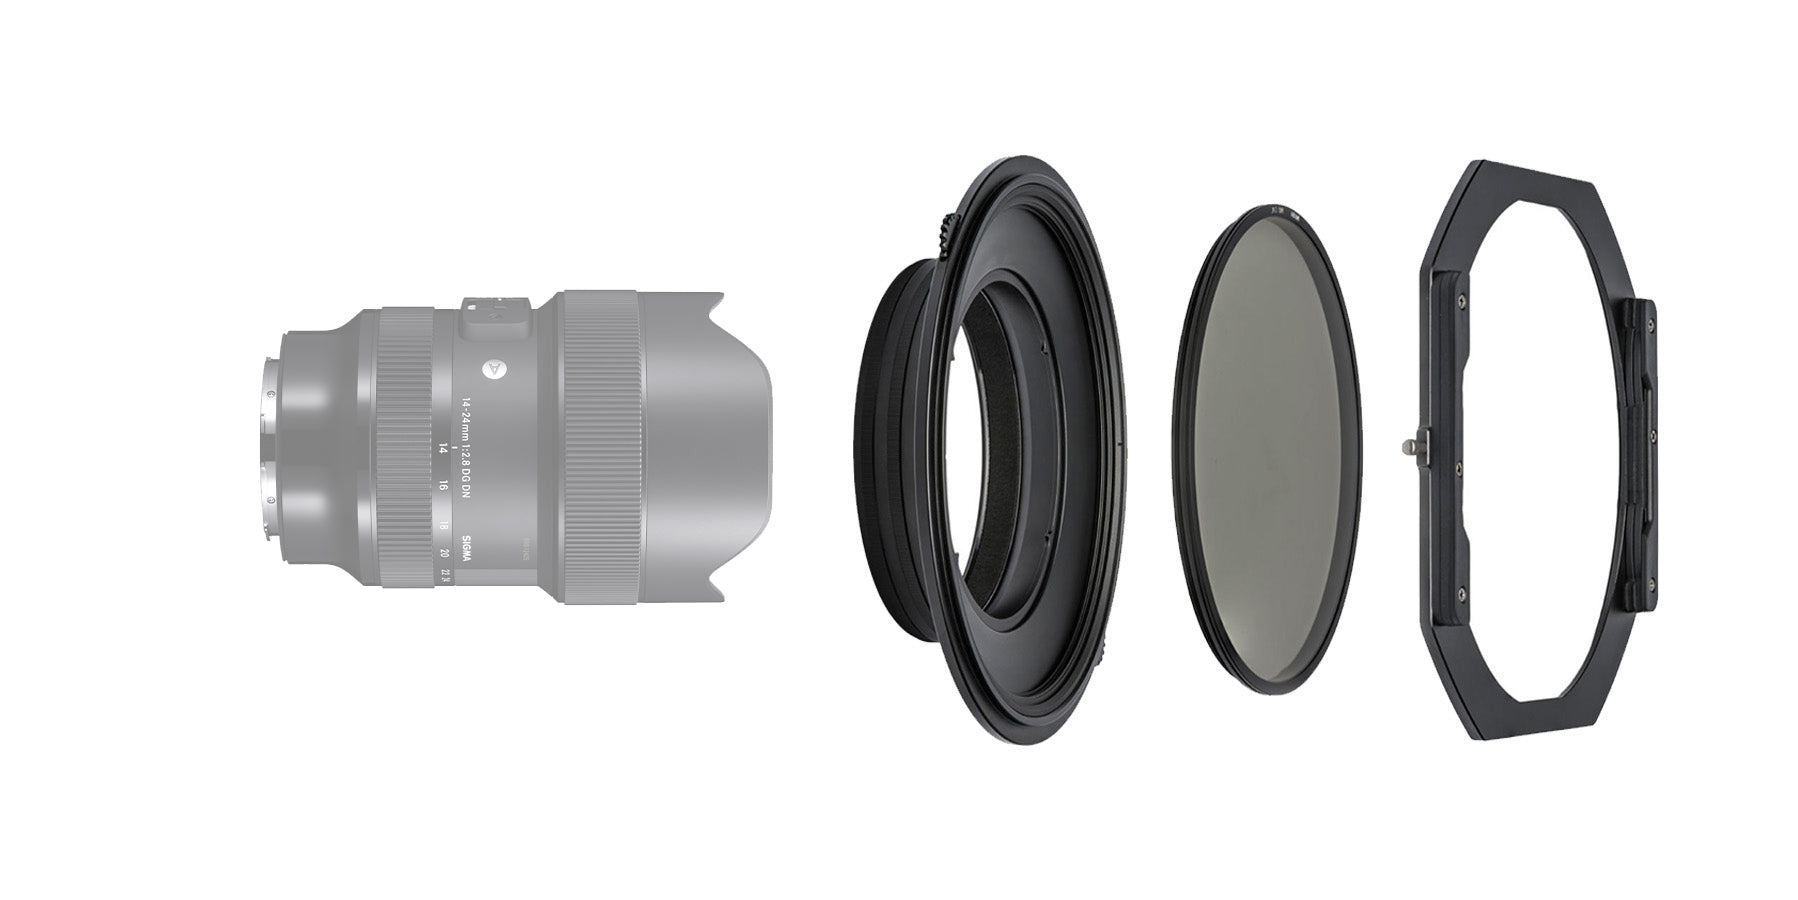 NiSi S5 Kit 150mm Filter Holder with CPL for Sigma 14-24mm f/2.8 DG DN Sony E Mount and L Mount